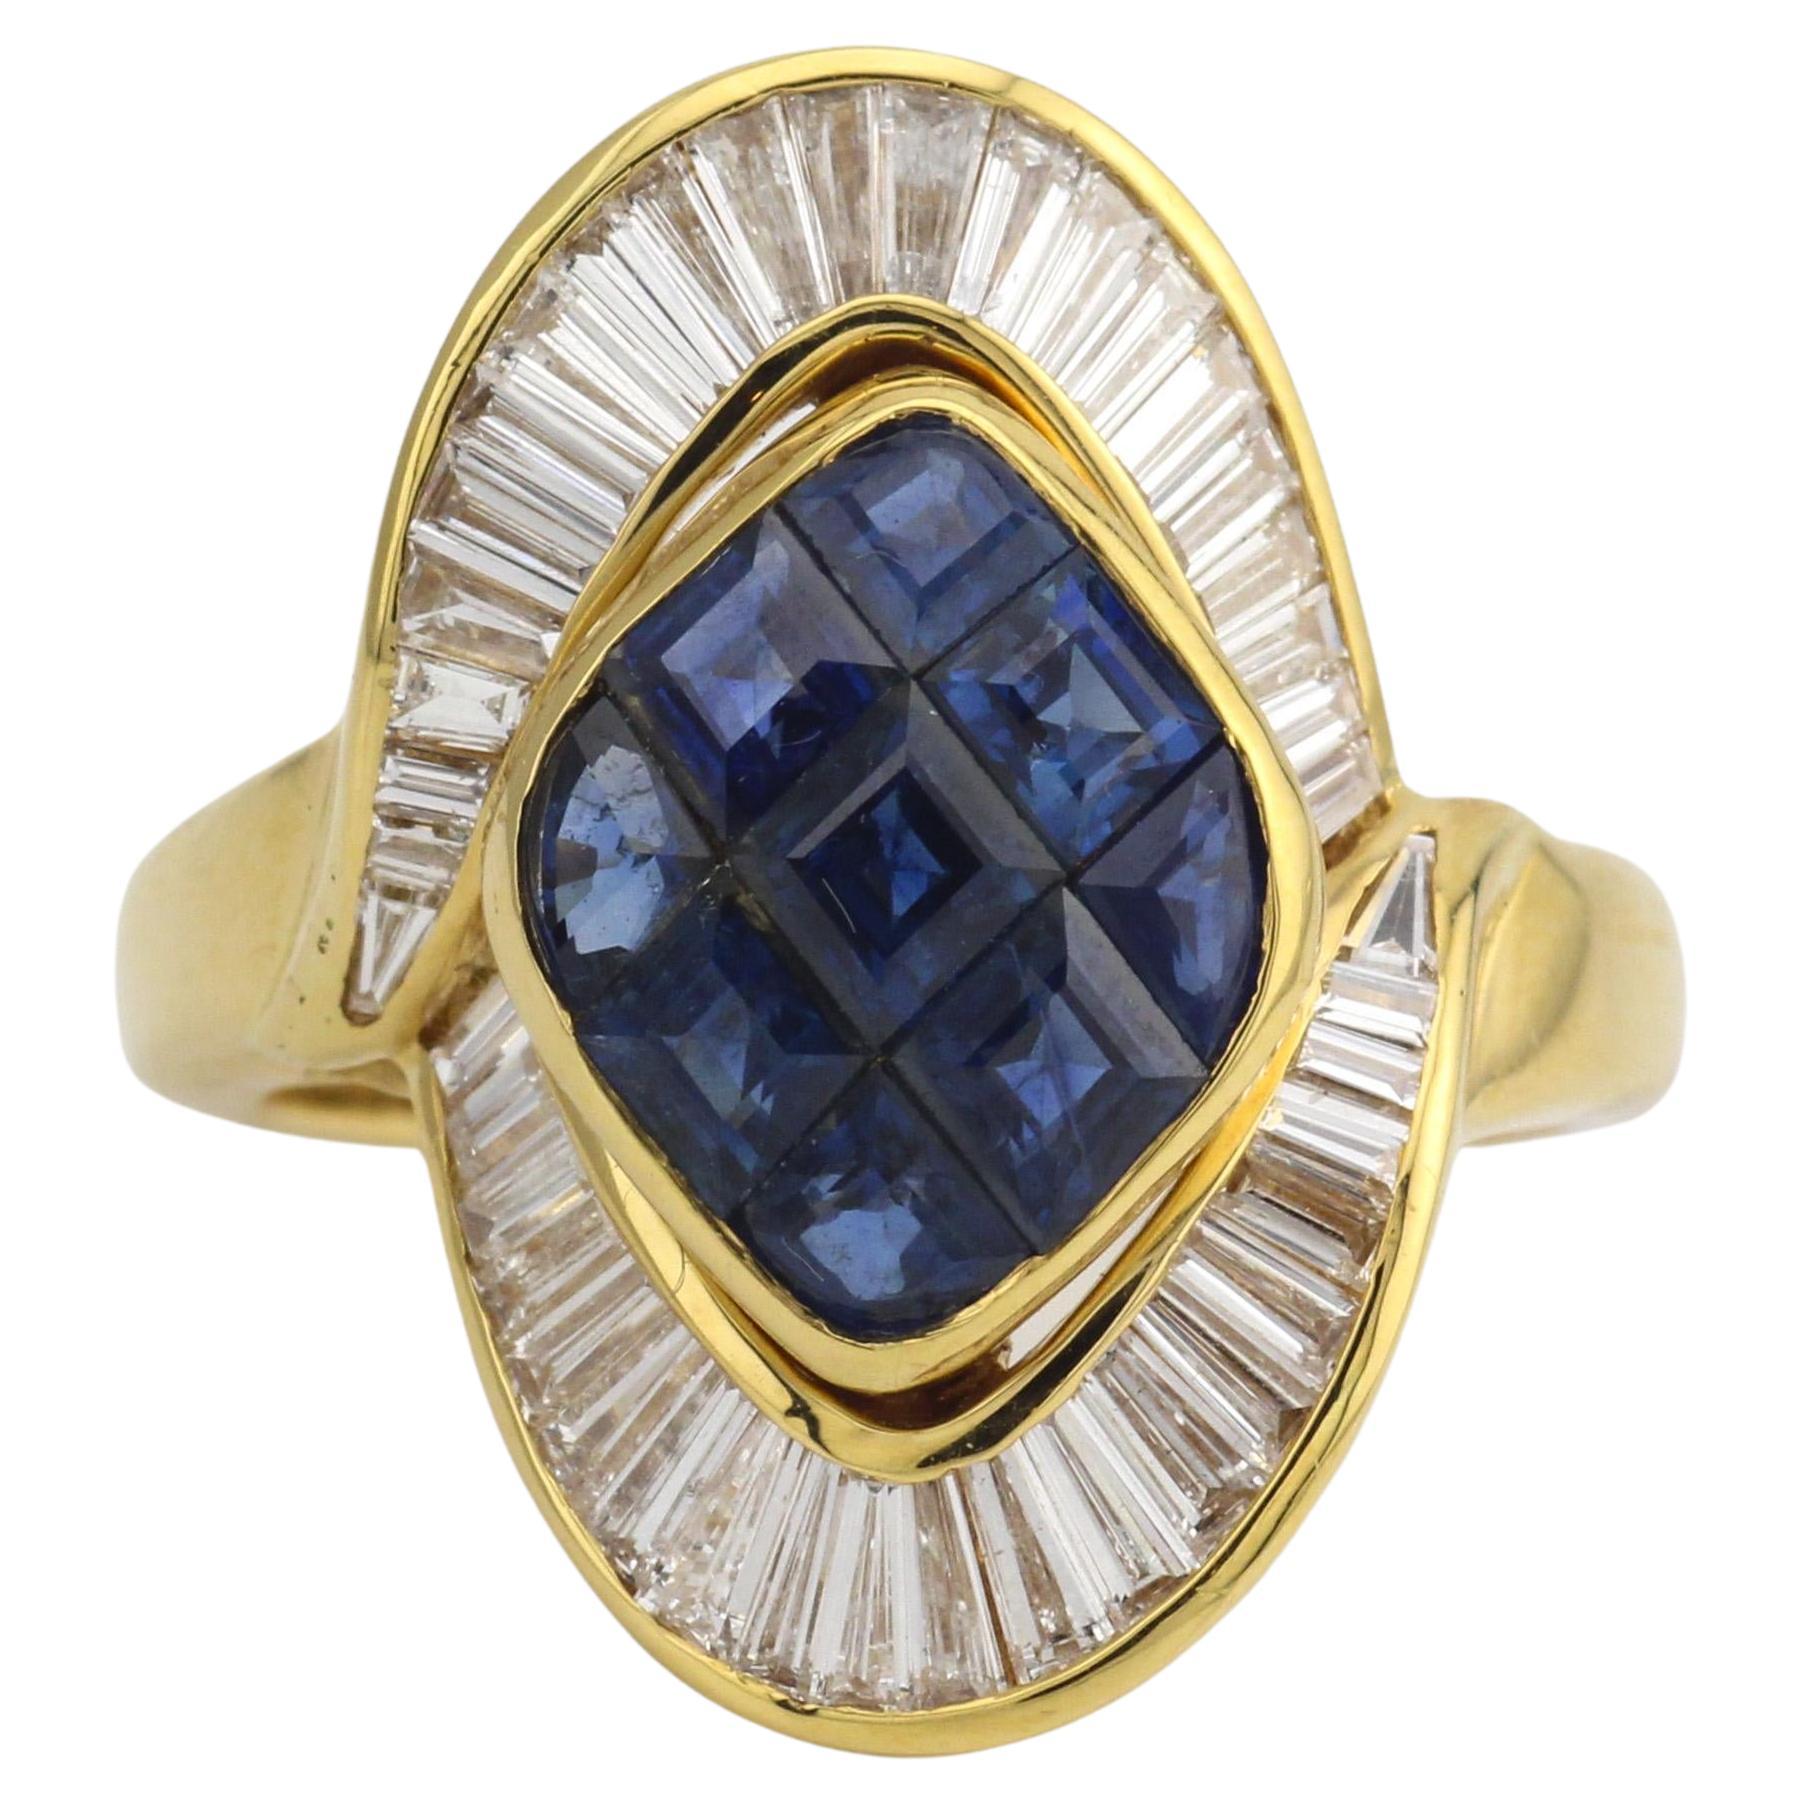 Mouawad Mystery Set Sapphire Diamond 18k Yellow Gold Ring Size 6.75 For Sale